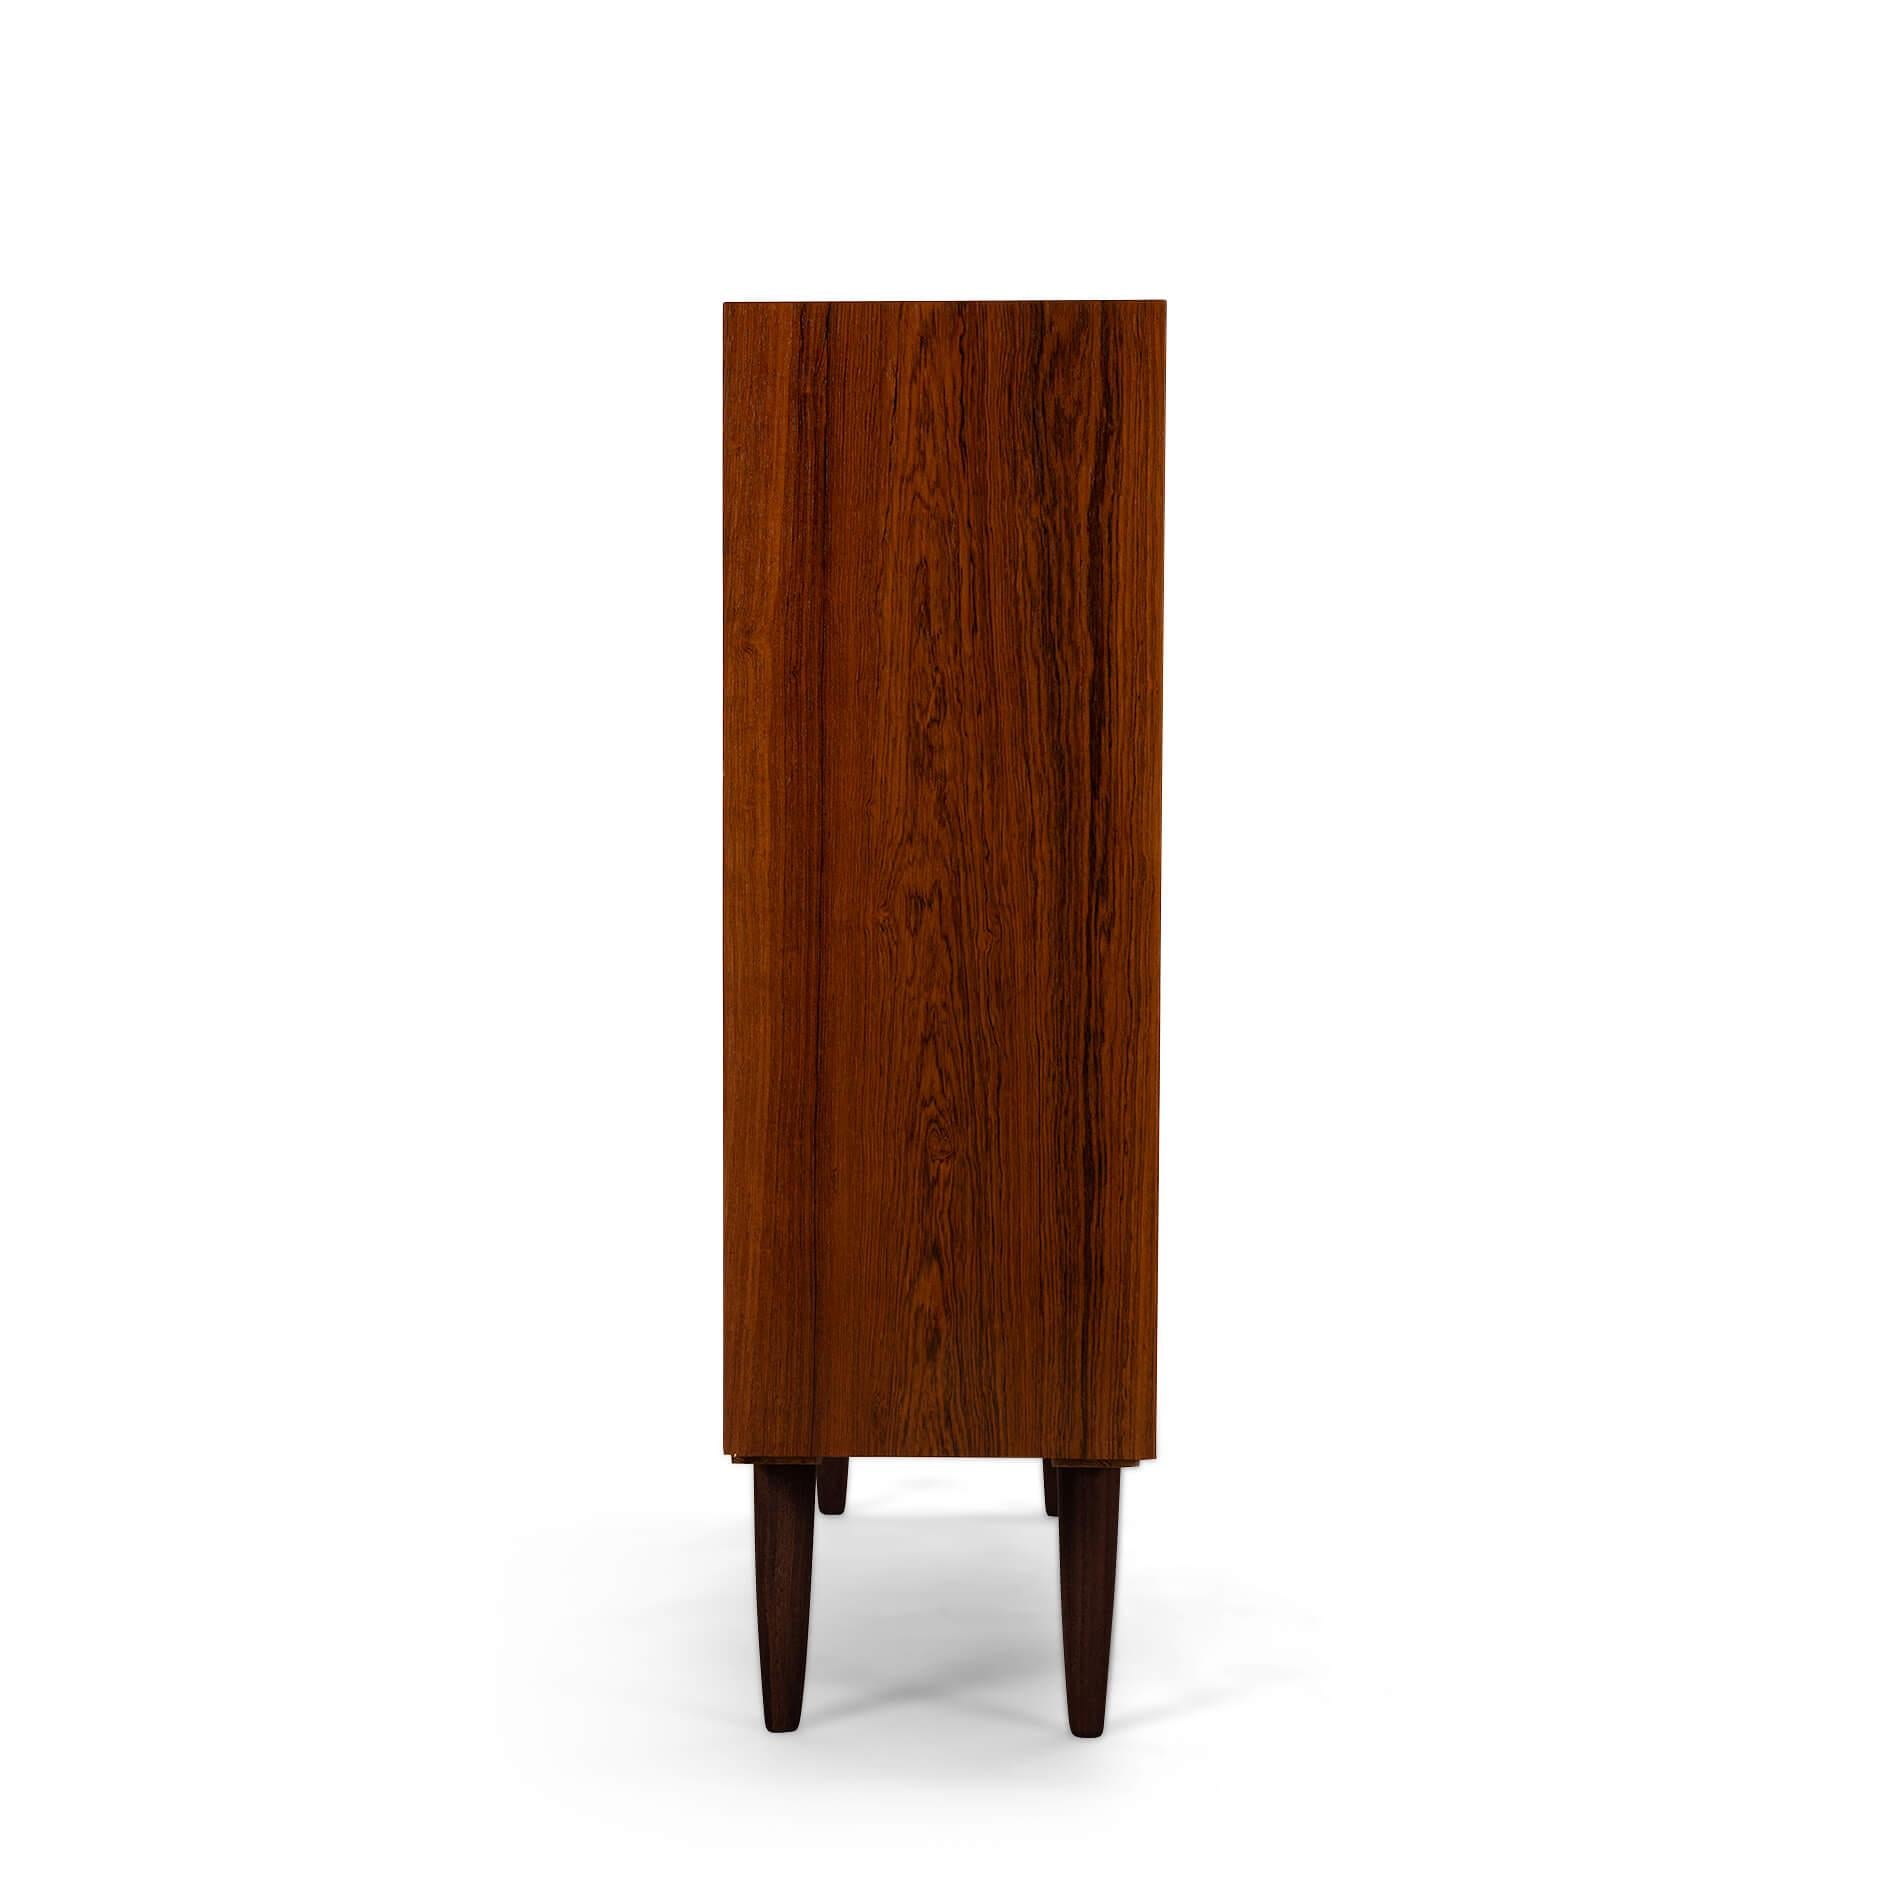 Danish tall bookcase in beautiful rosewood veneer. Designed by Carlo Jensen and made by Hundevad & Co.

This bookcase is in very good vintage condition and has a total of 4 height-adjustable shelves.
